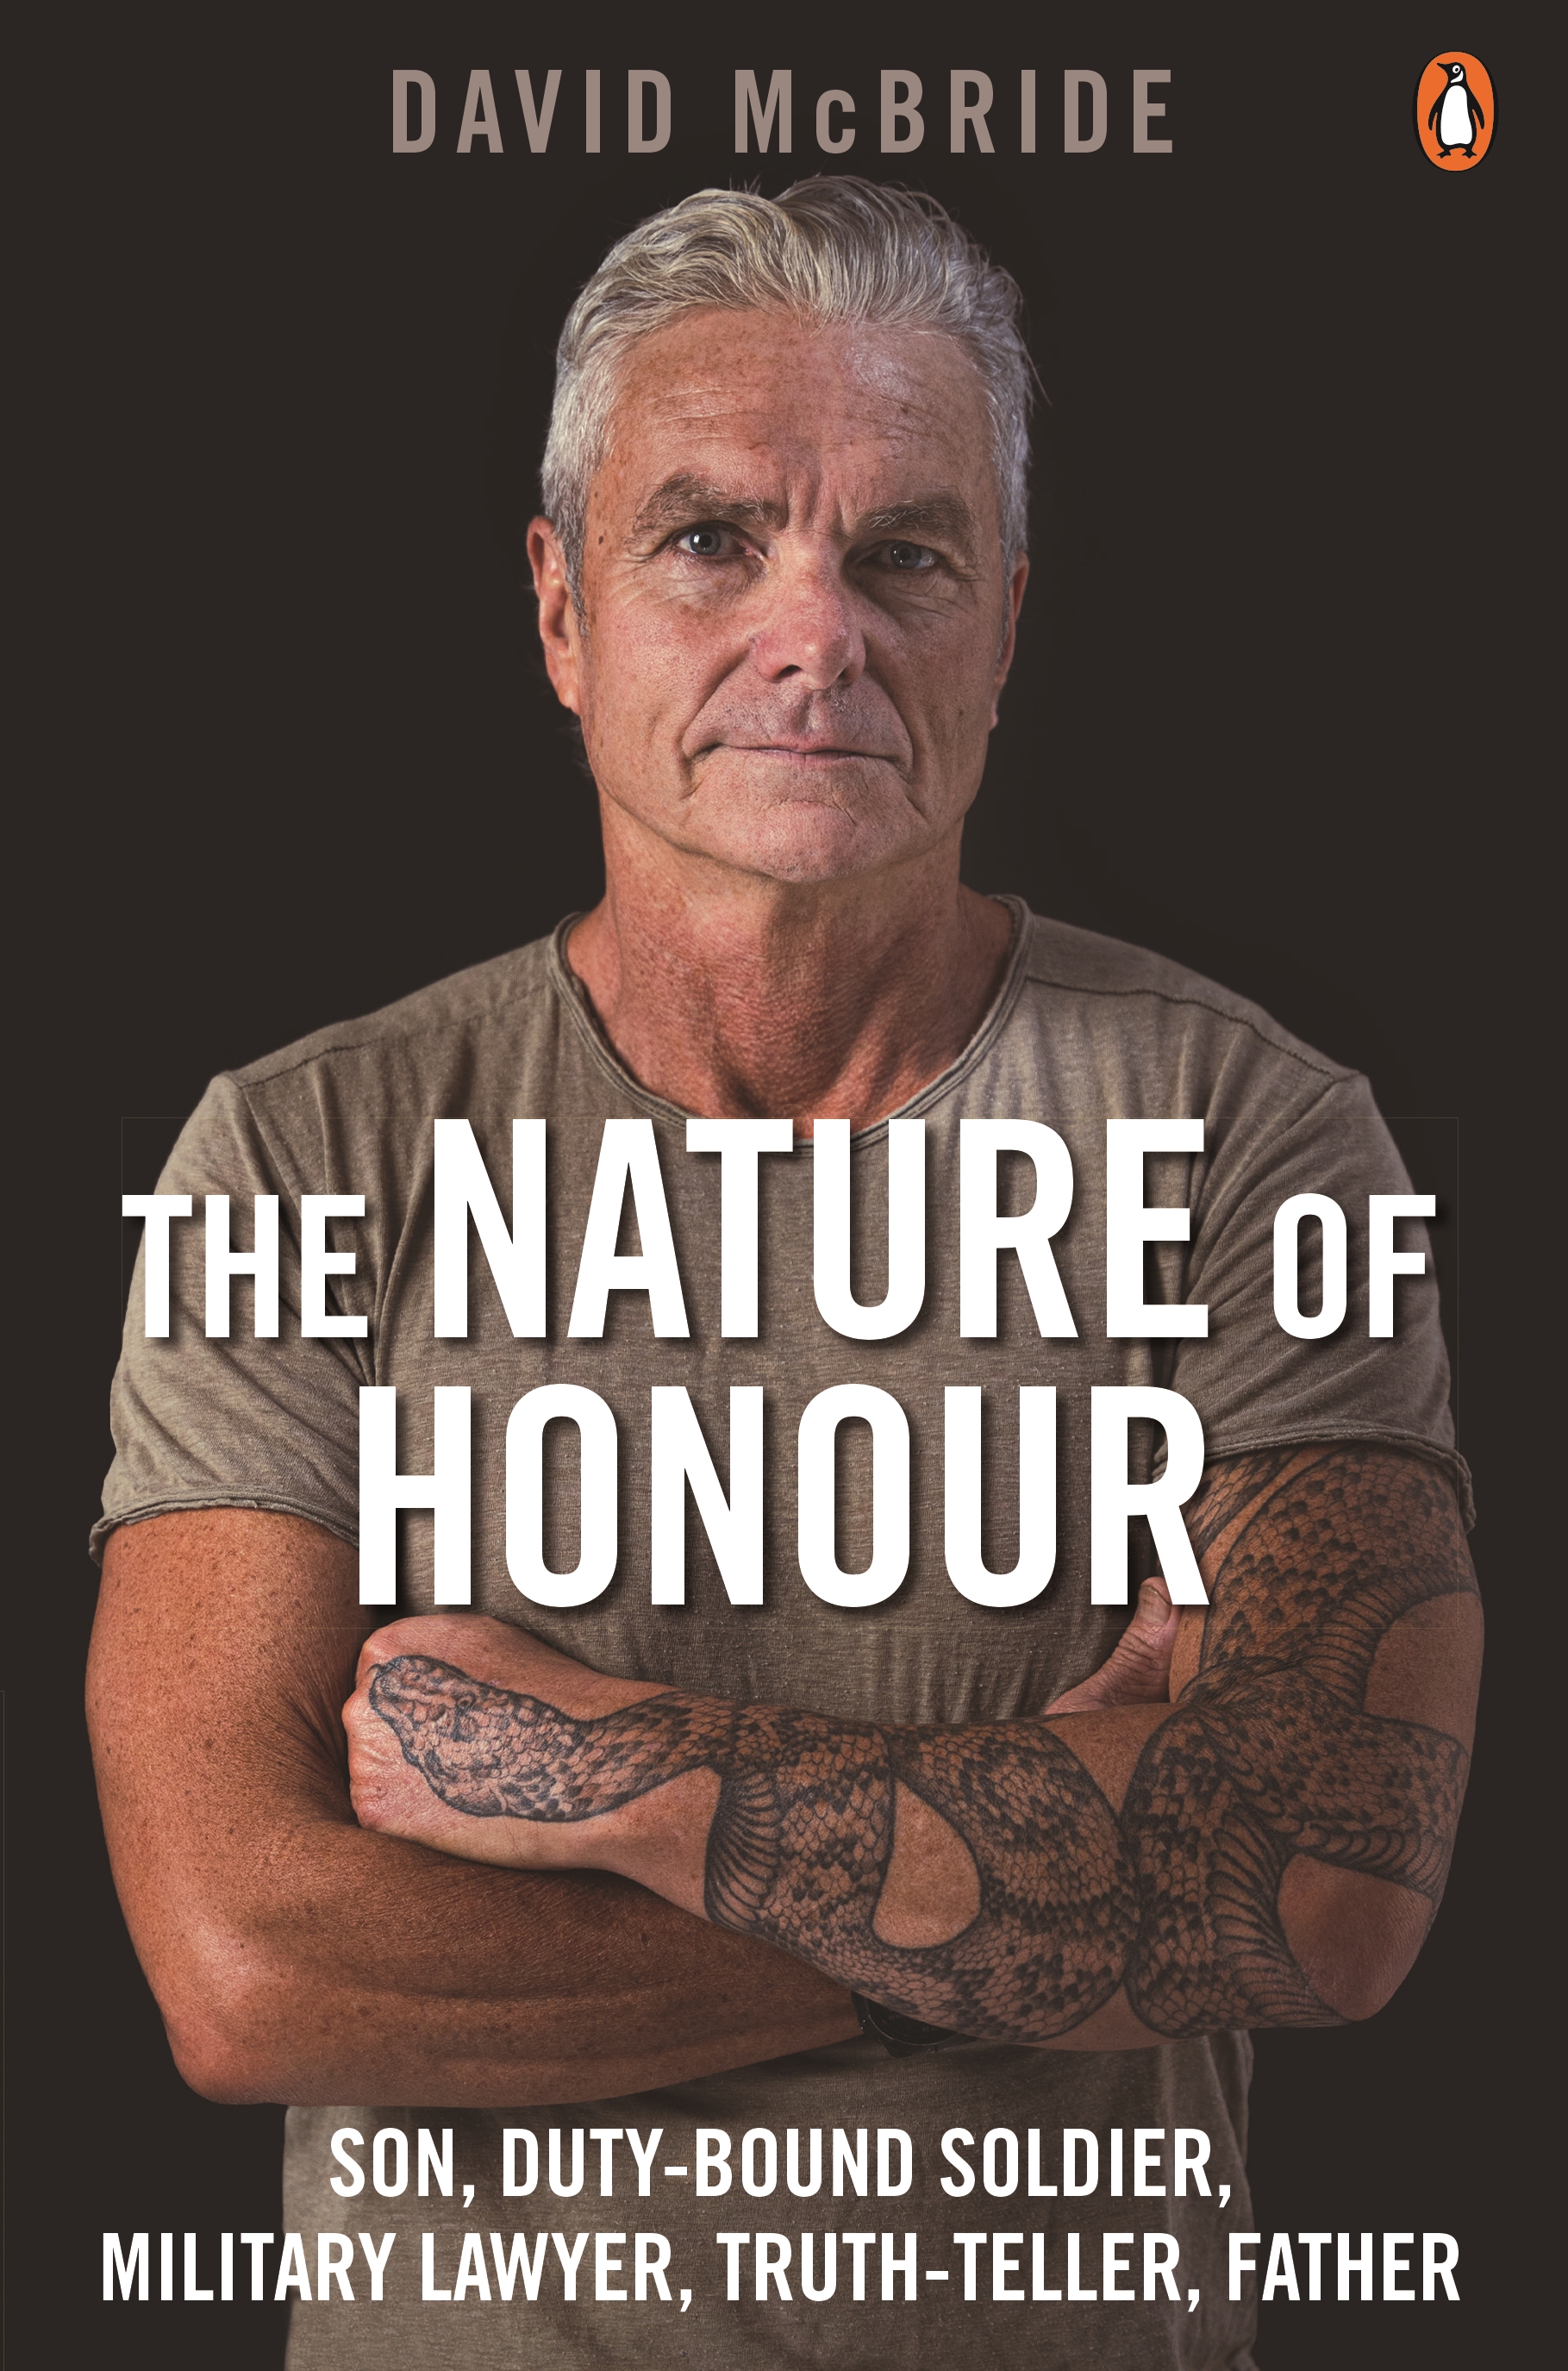 The Nature of Honour: Son, duty-bound soldier, military lawyer, truth-teller, father